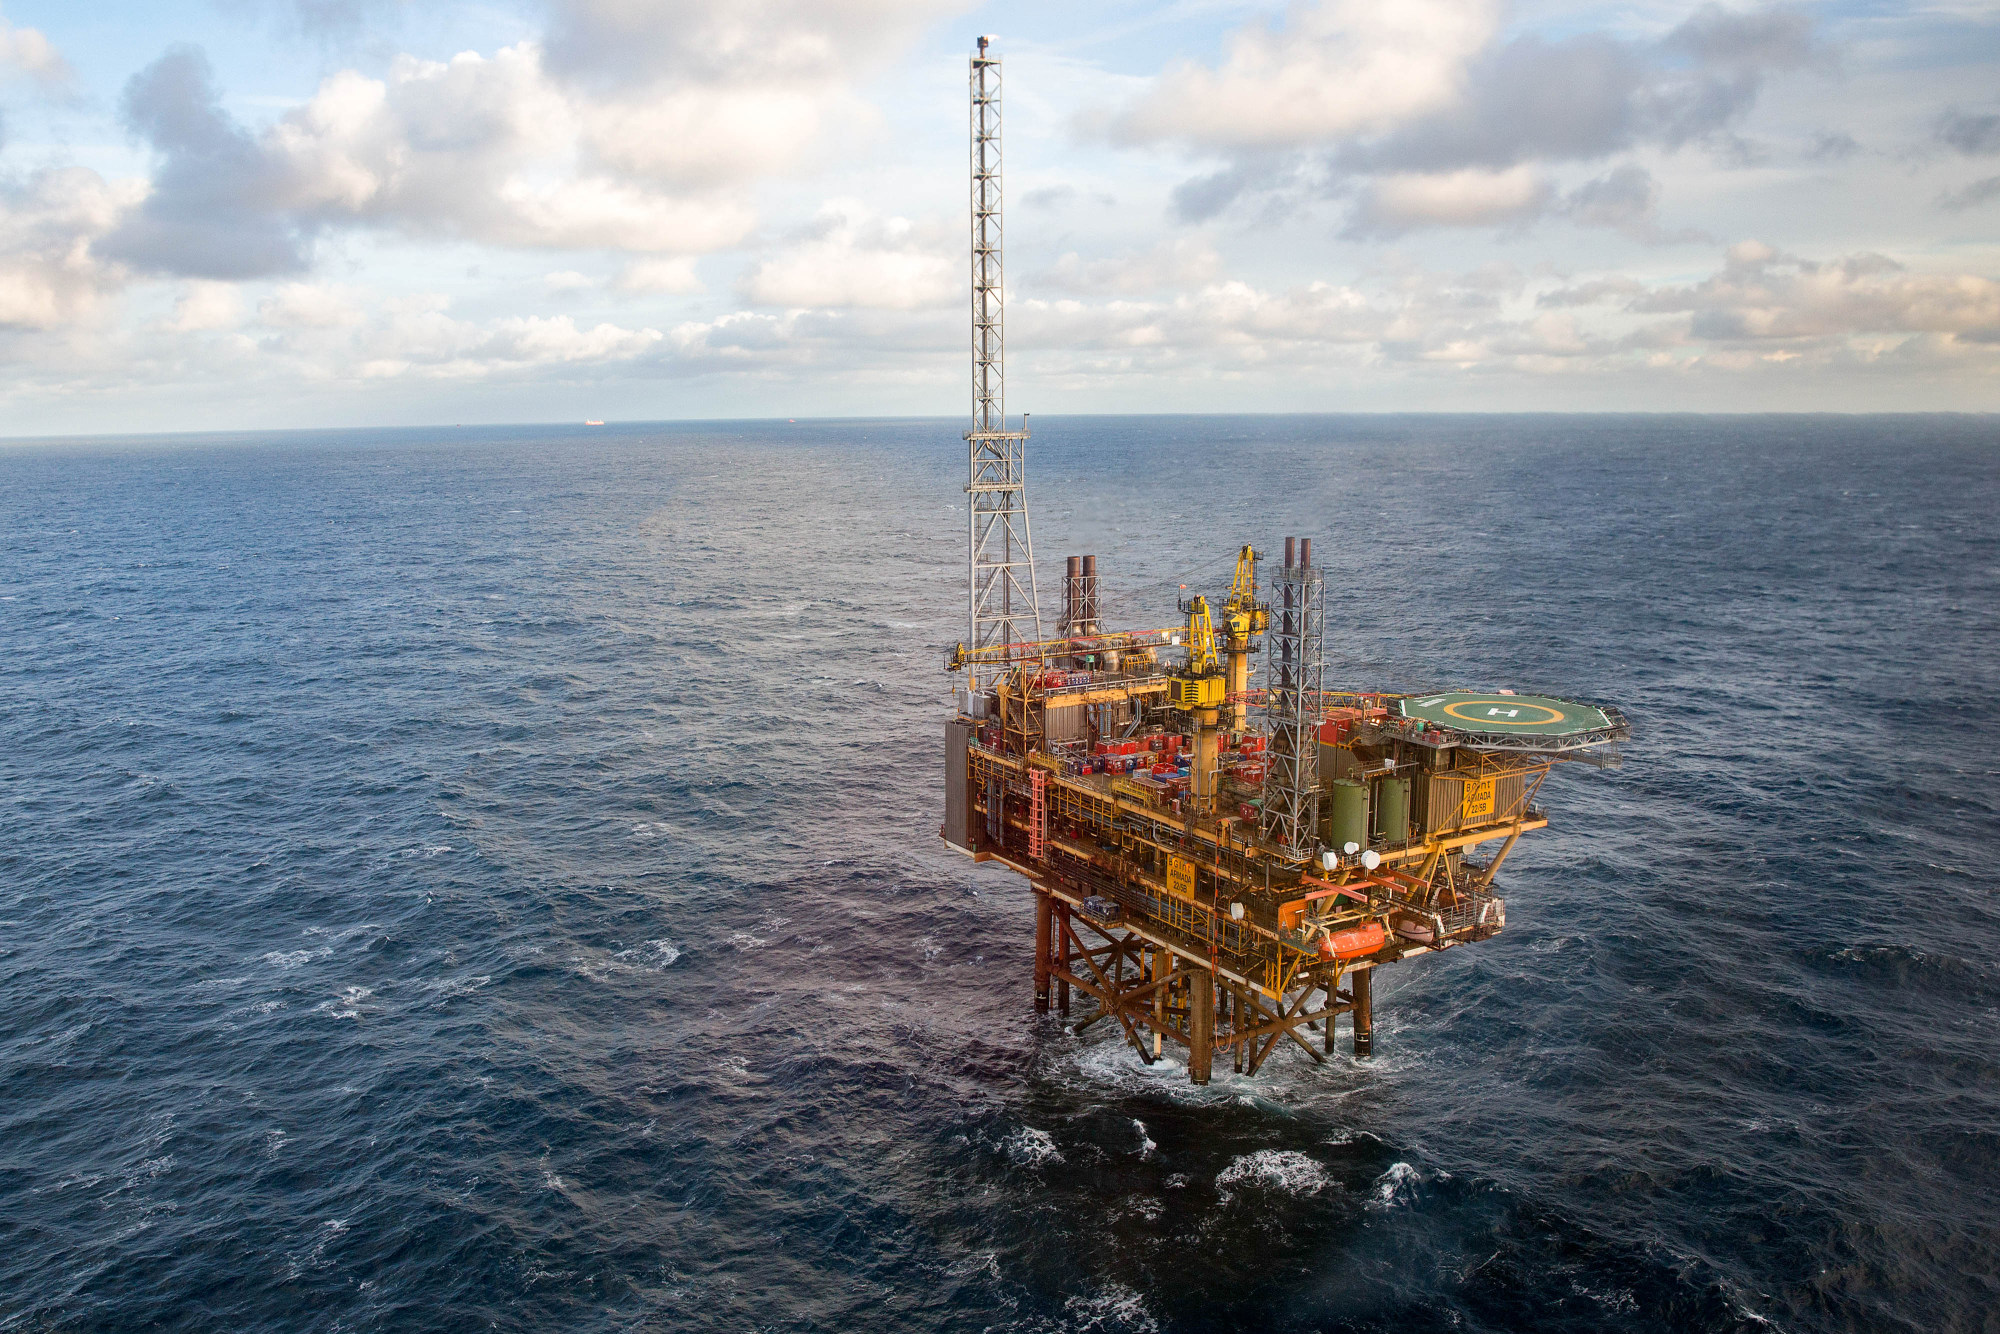 Access To BG Group Plc's Offshore Armada Gas And Condensate Platform Ahead Of Their Merger With Royal Dutch Shell Plc